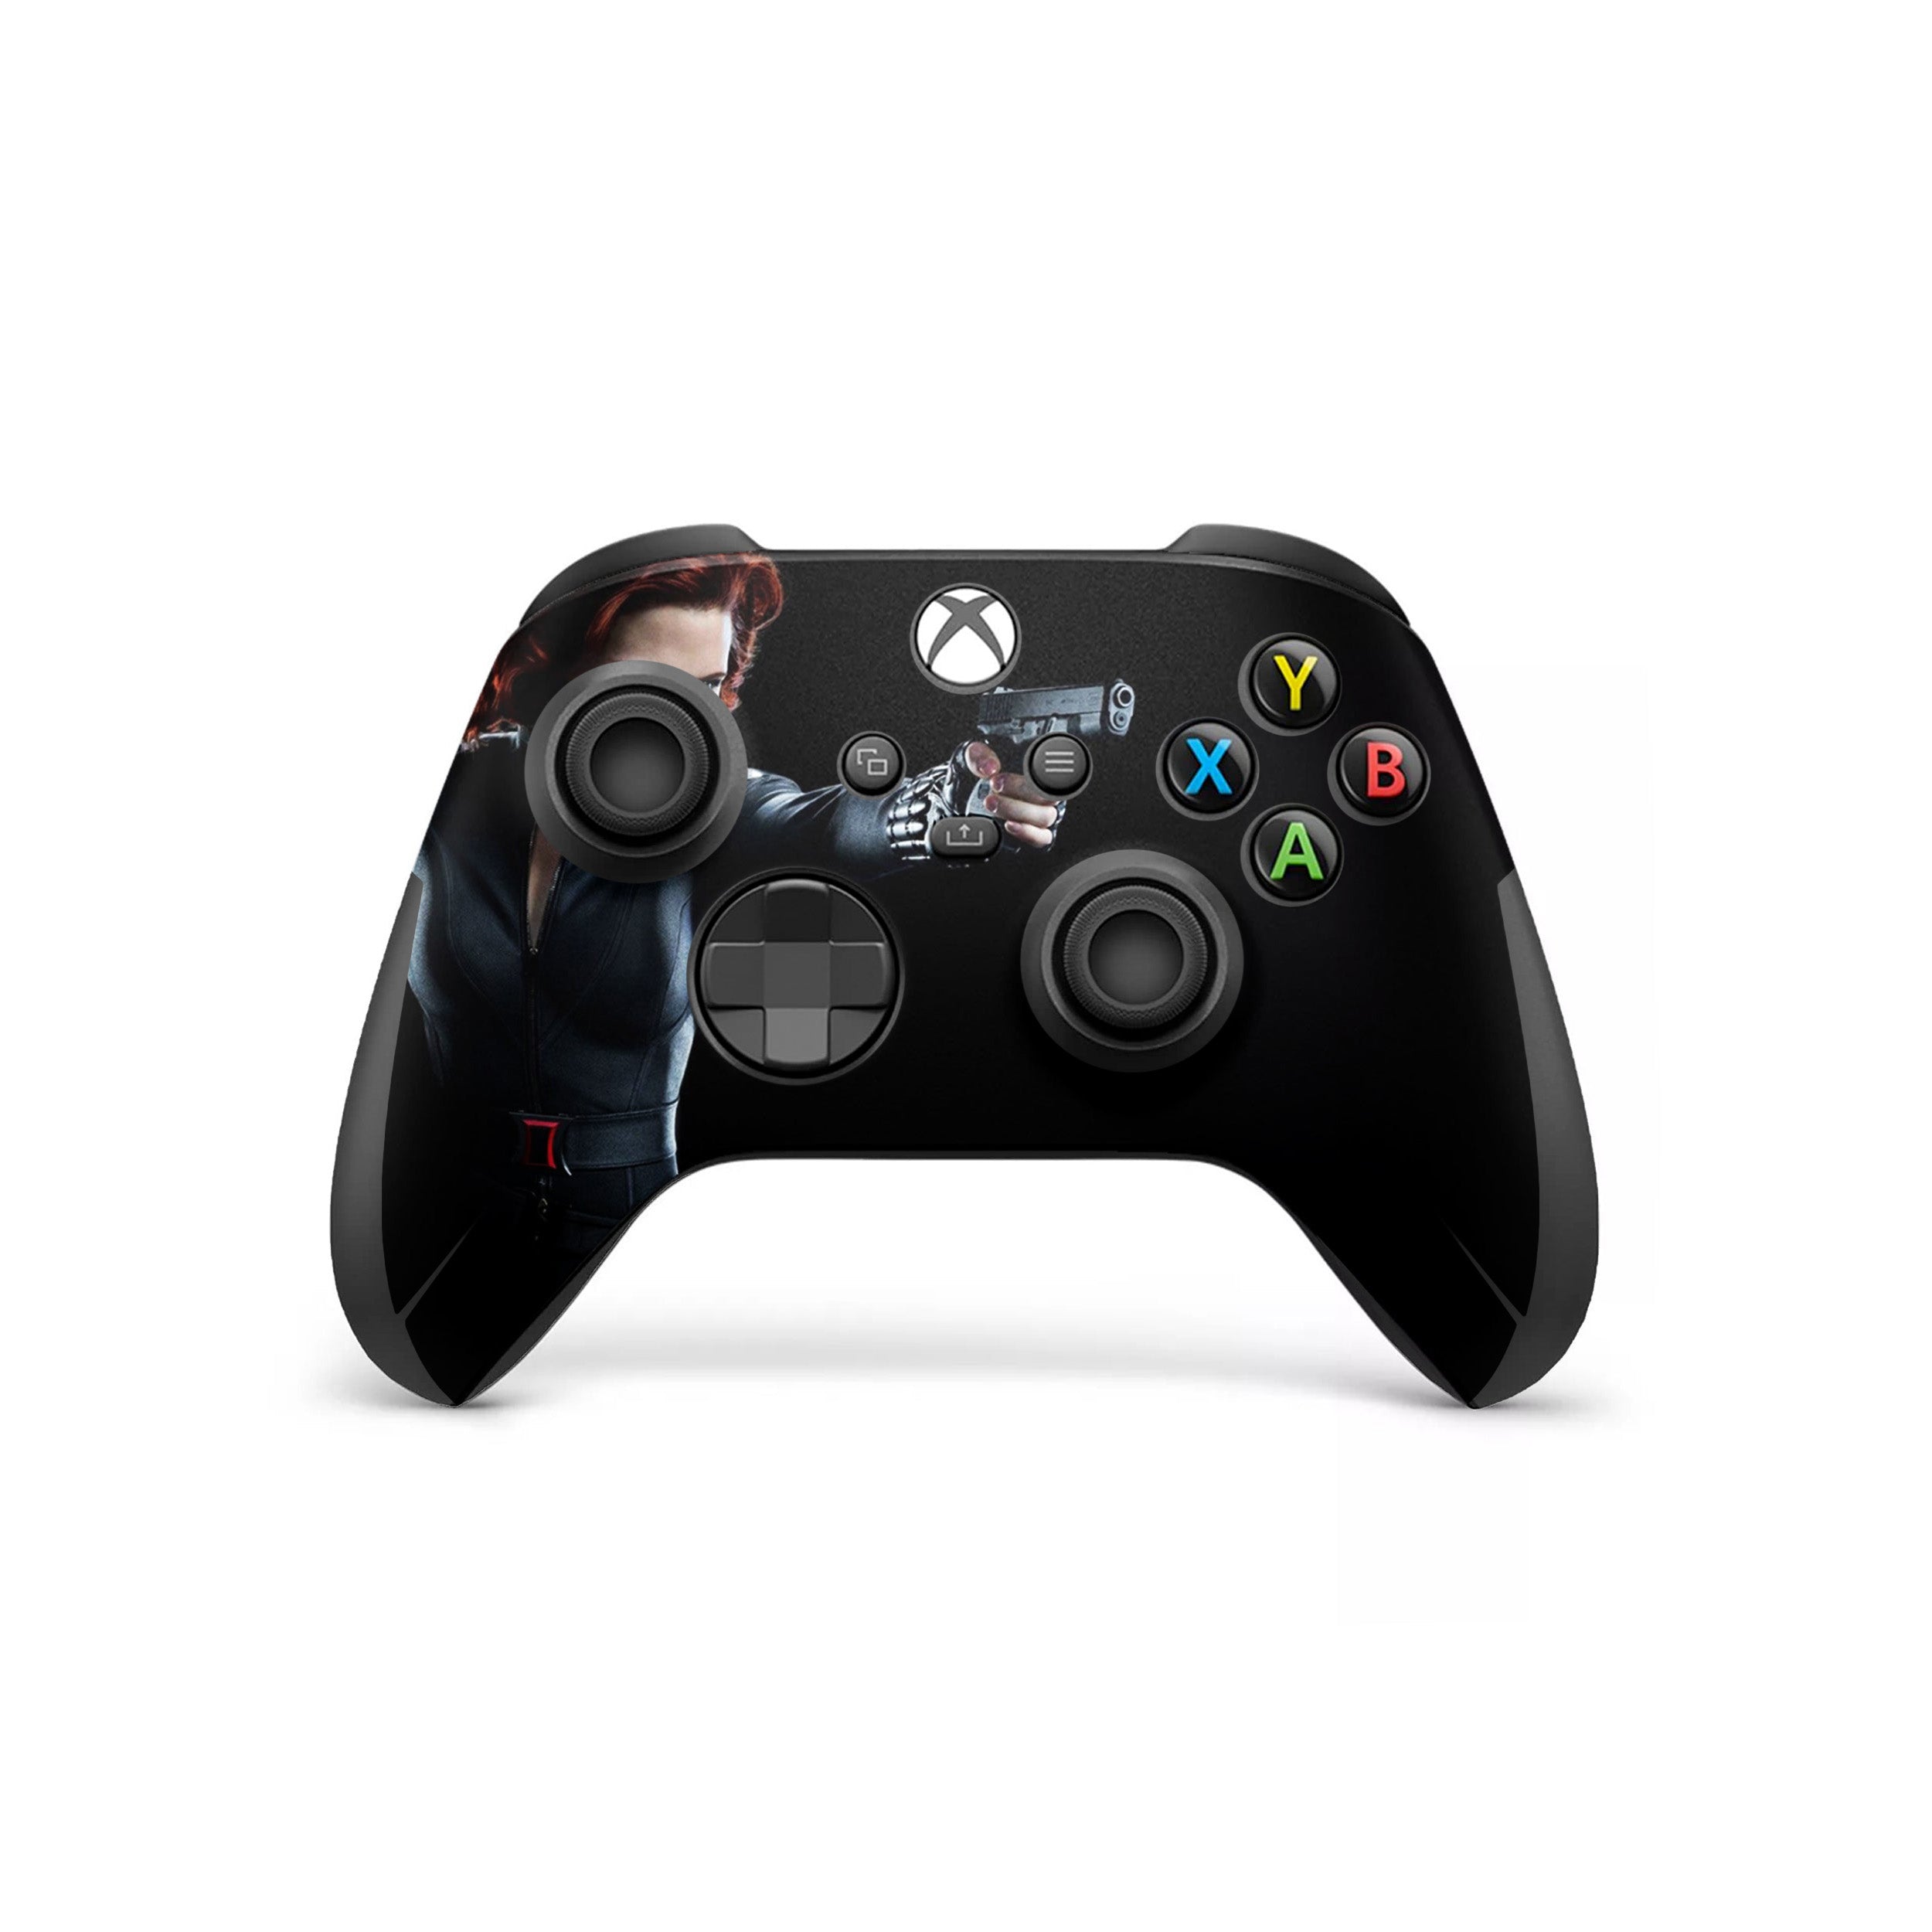 A video game skin featuring a Marvel Black Widow design for the Xbox Wireless Controller.